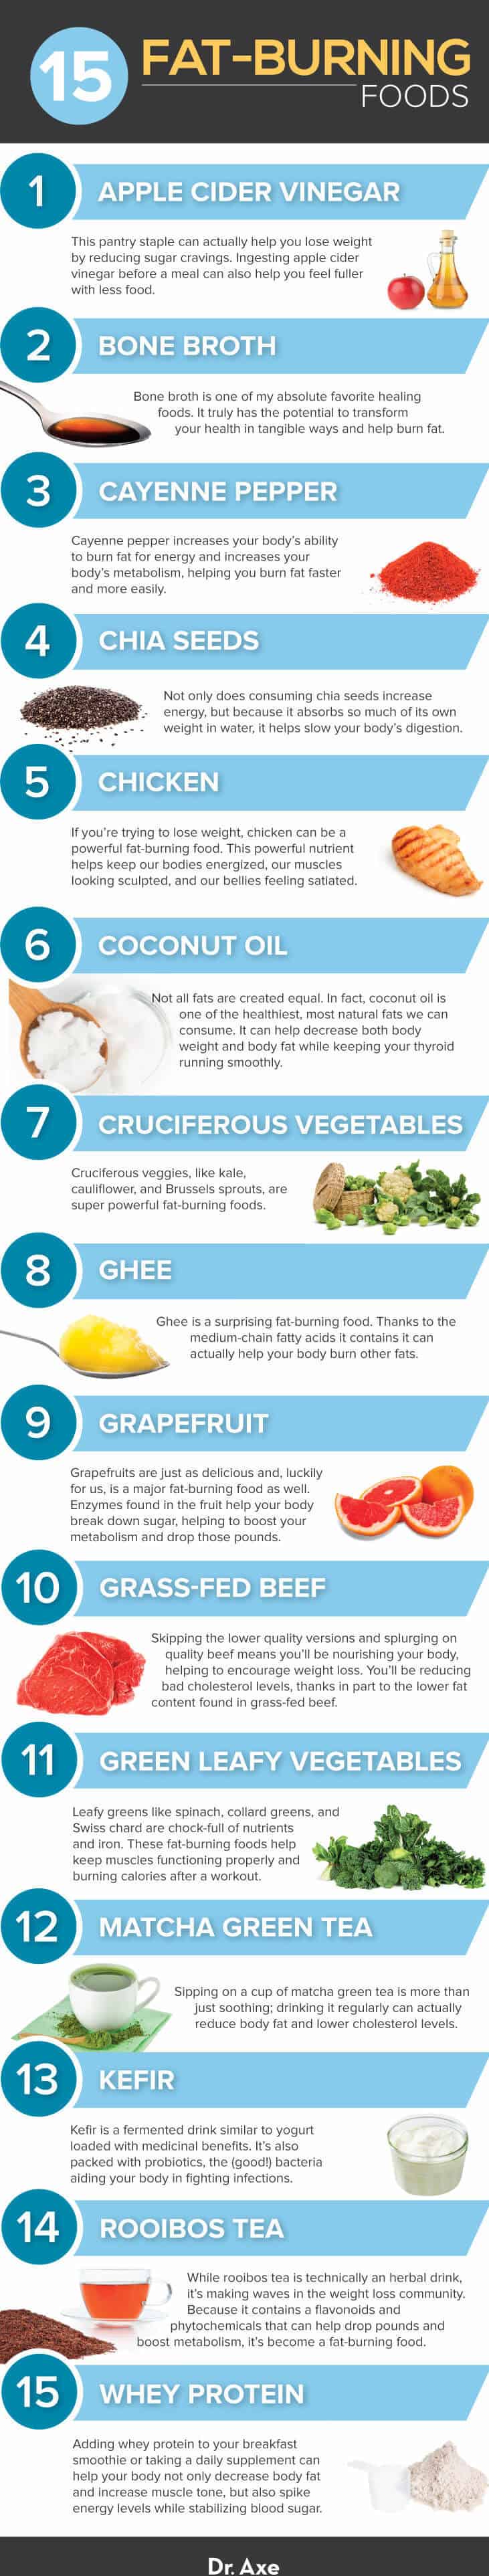 Fat-Burning Foods - Dr.Axe